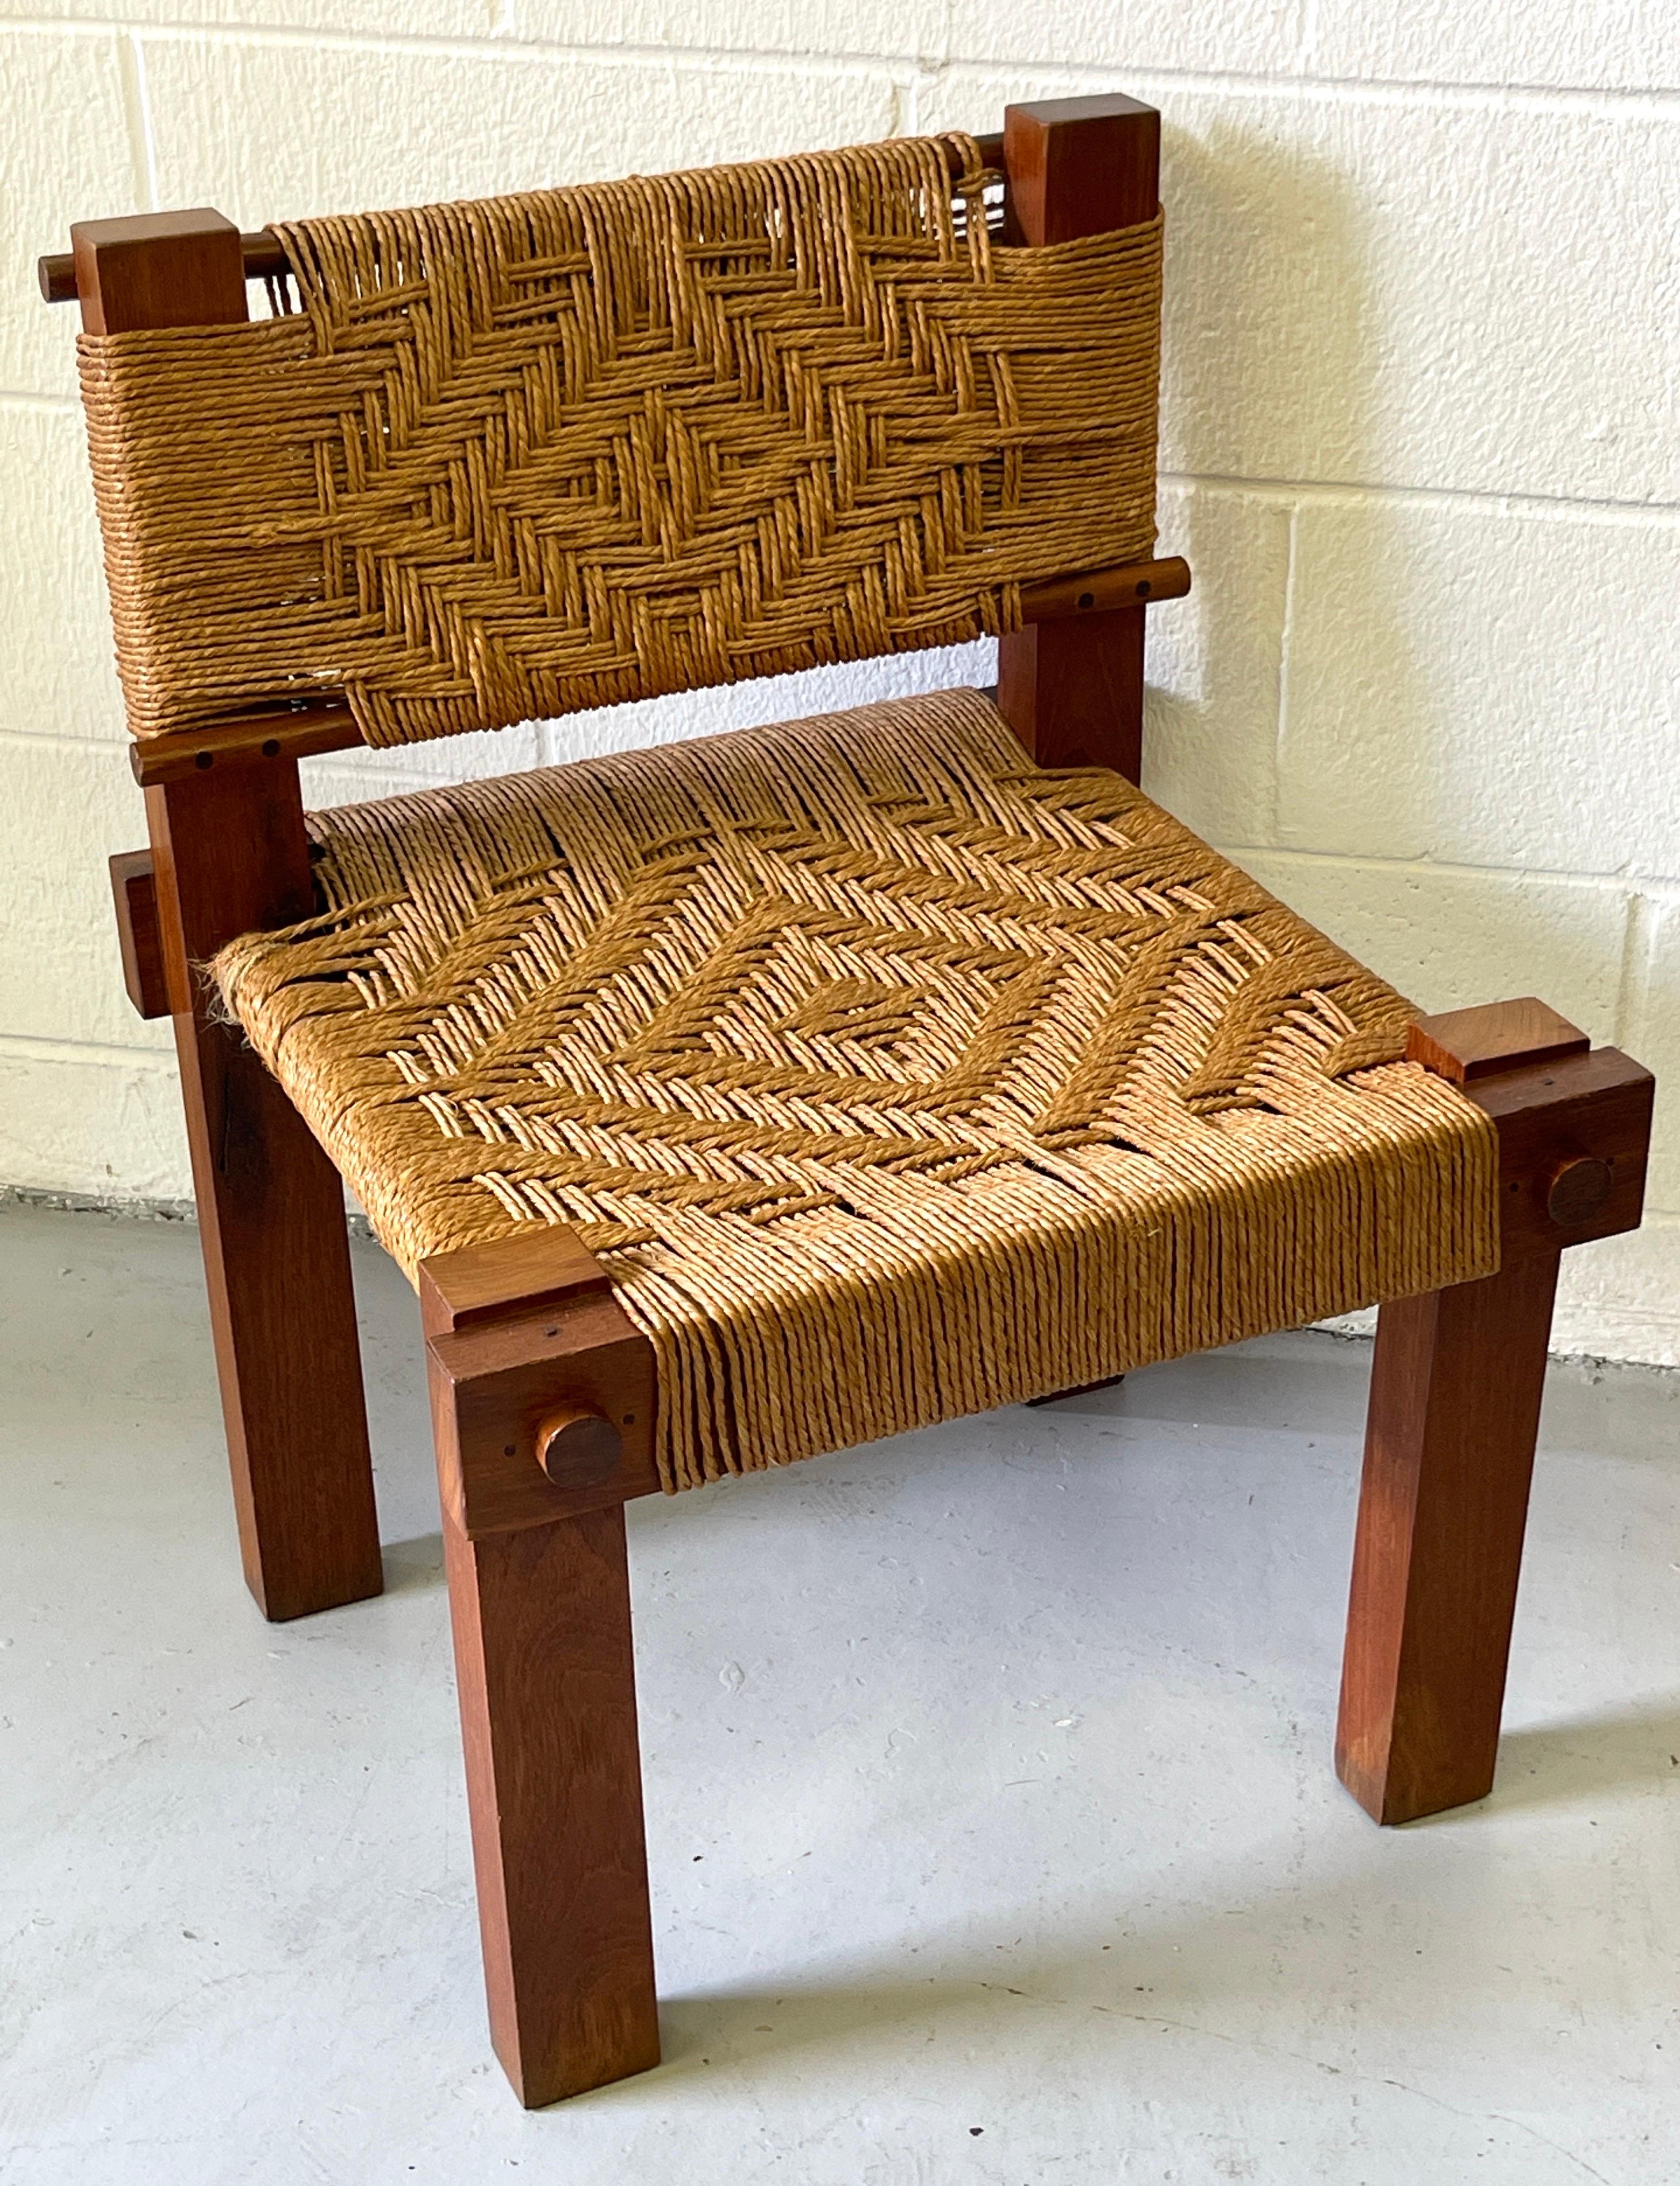 Mini Boga for Taaru, teak & woven rope occasional chair 
India, Circa 1960s

A fine example, of doweled teak construction, with hand-woven geometric woven rope back and seat rest. Branded signature on the rear left leg.

Overall measurements 
The